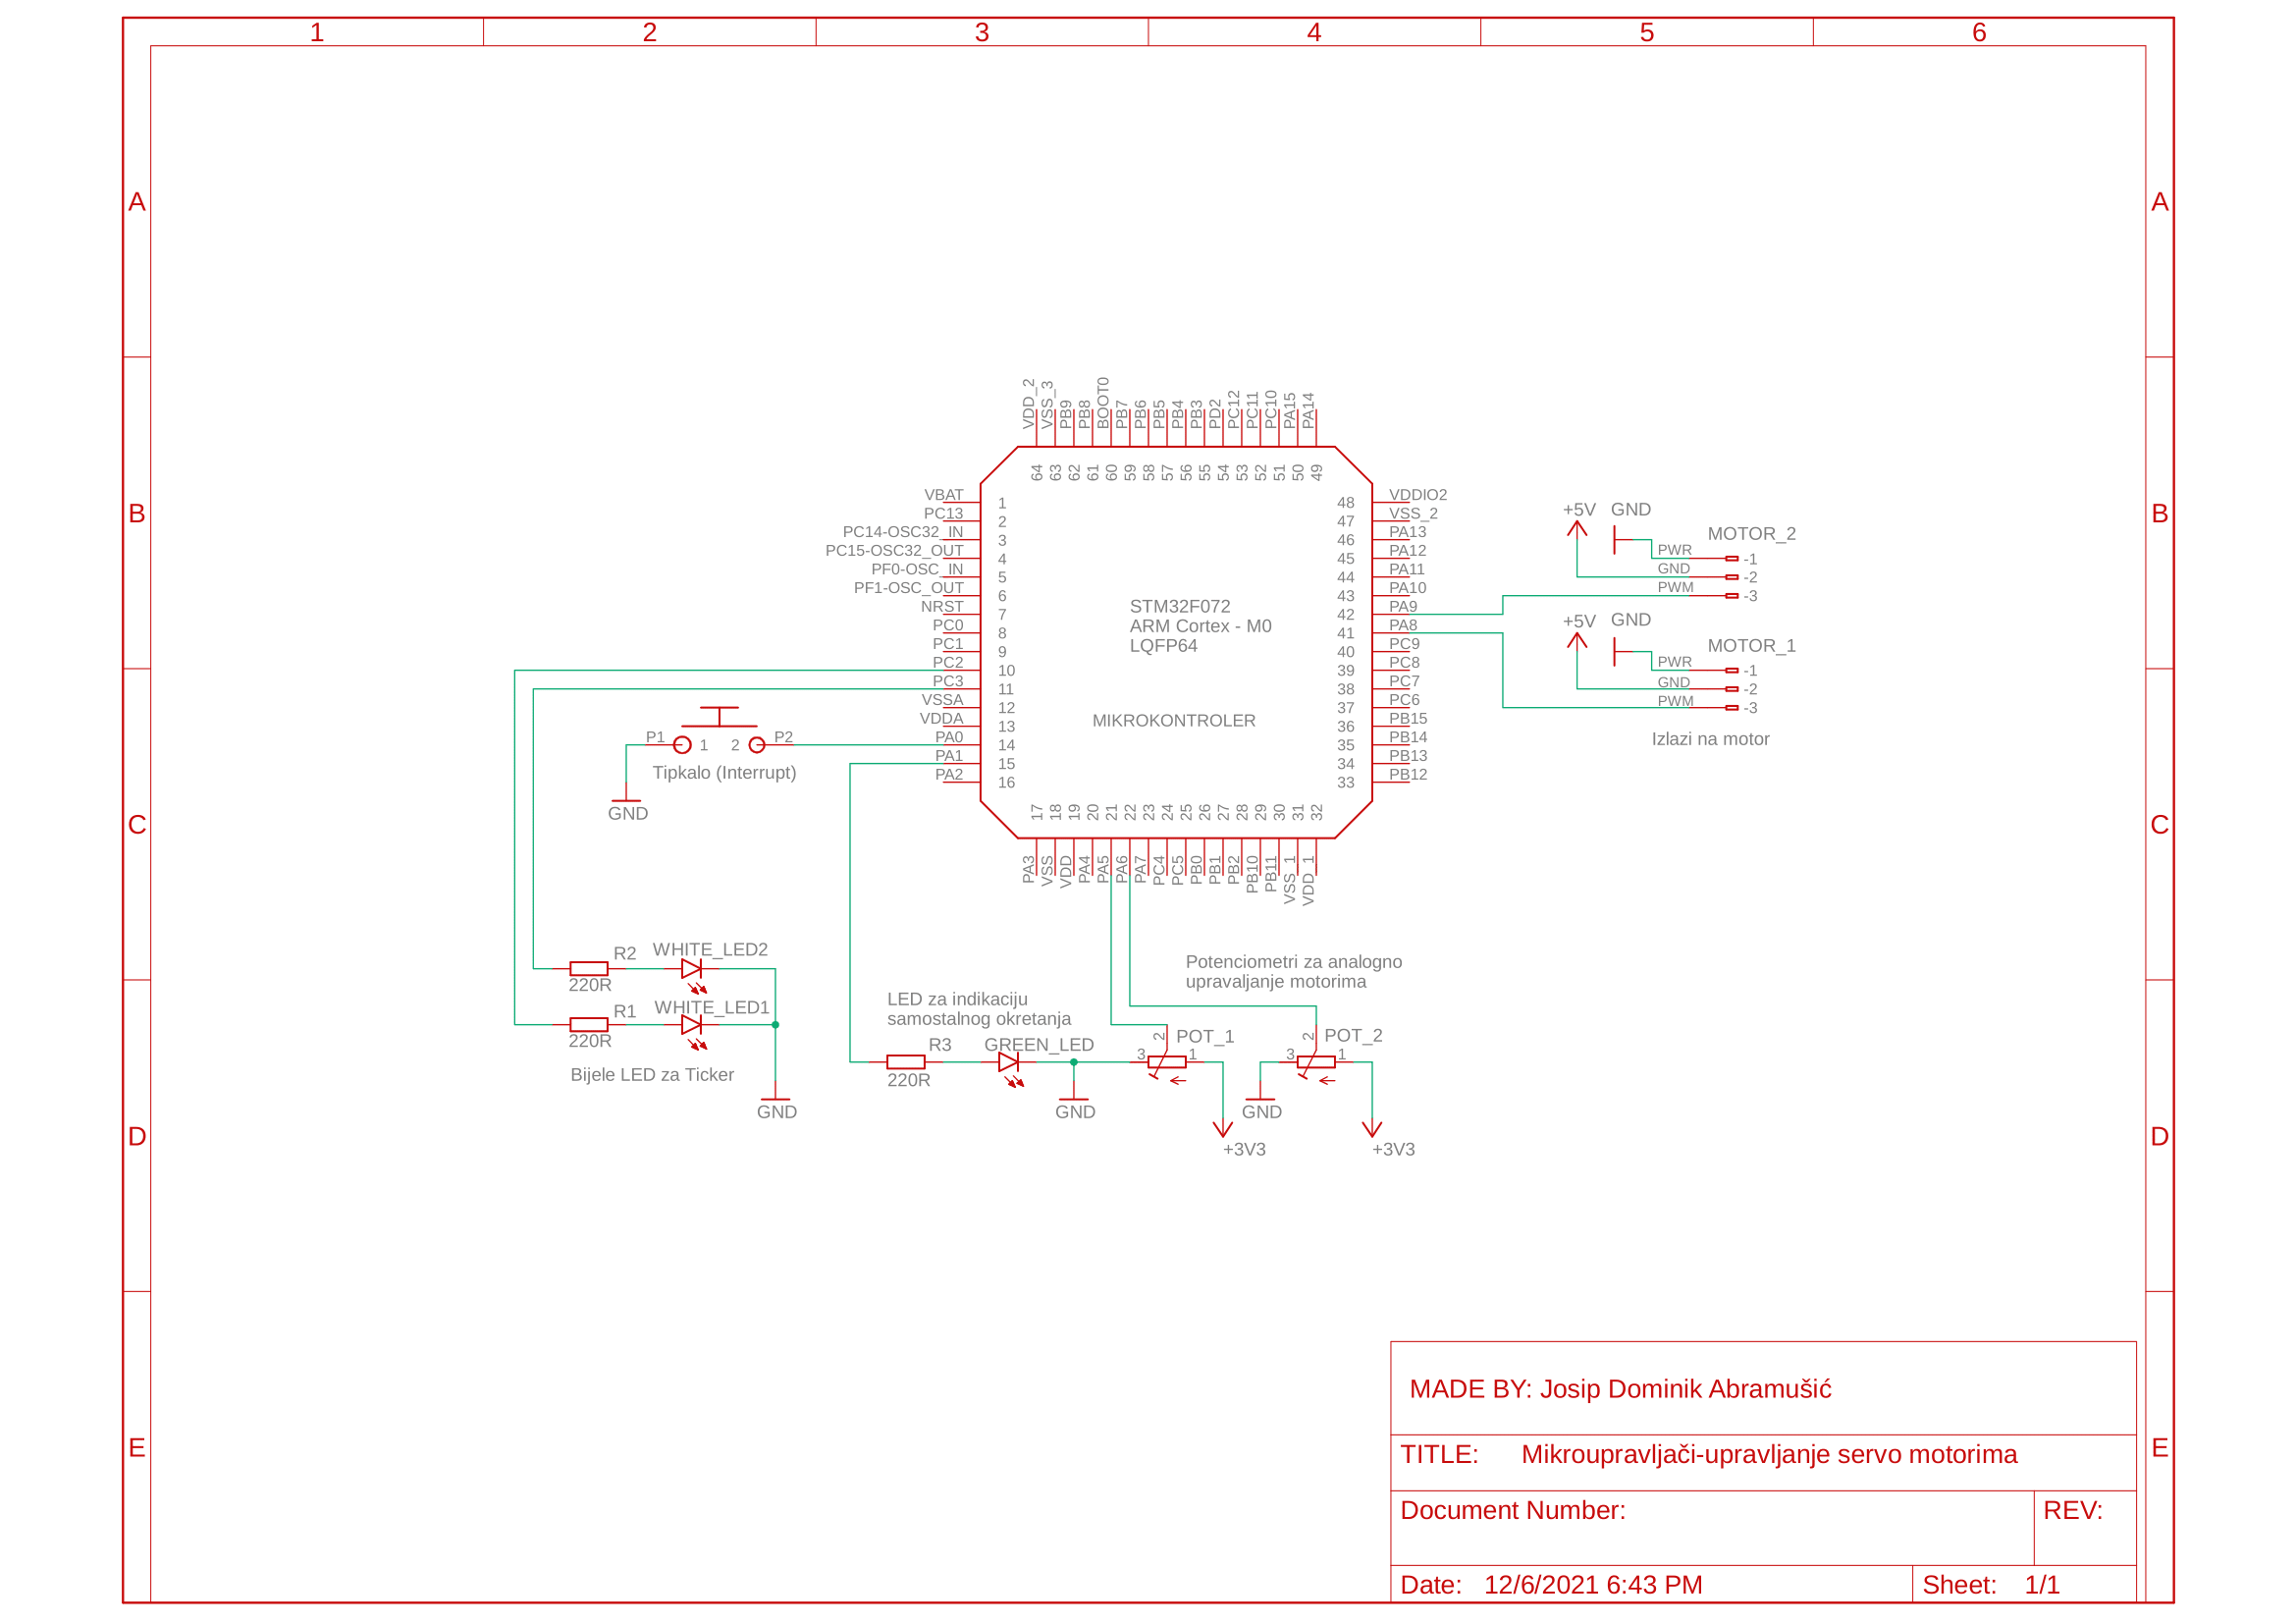 https://os.mbed.com/media/uploads/racedom/schematic-1.png